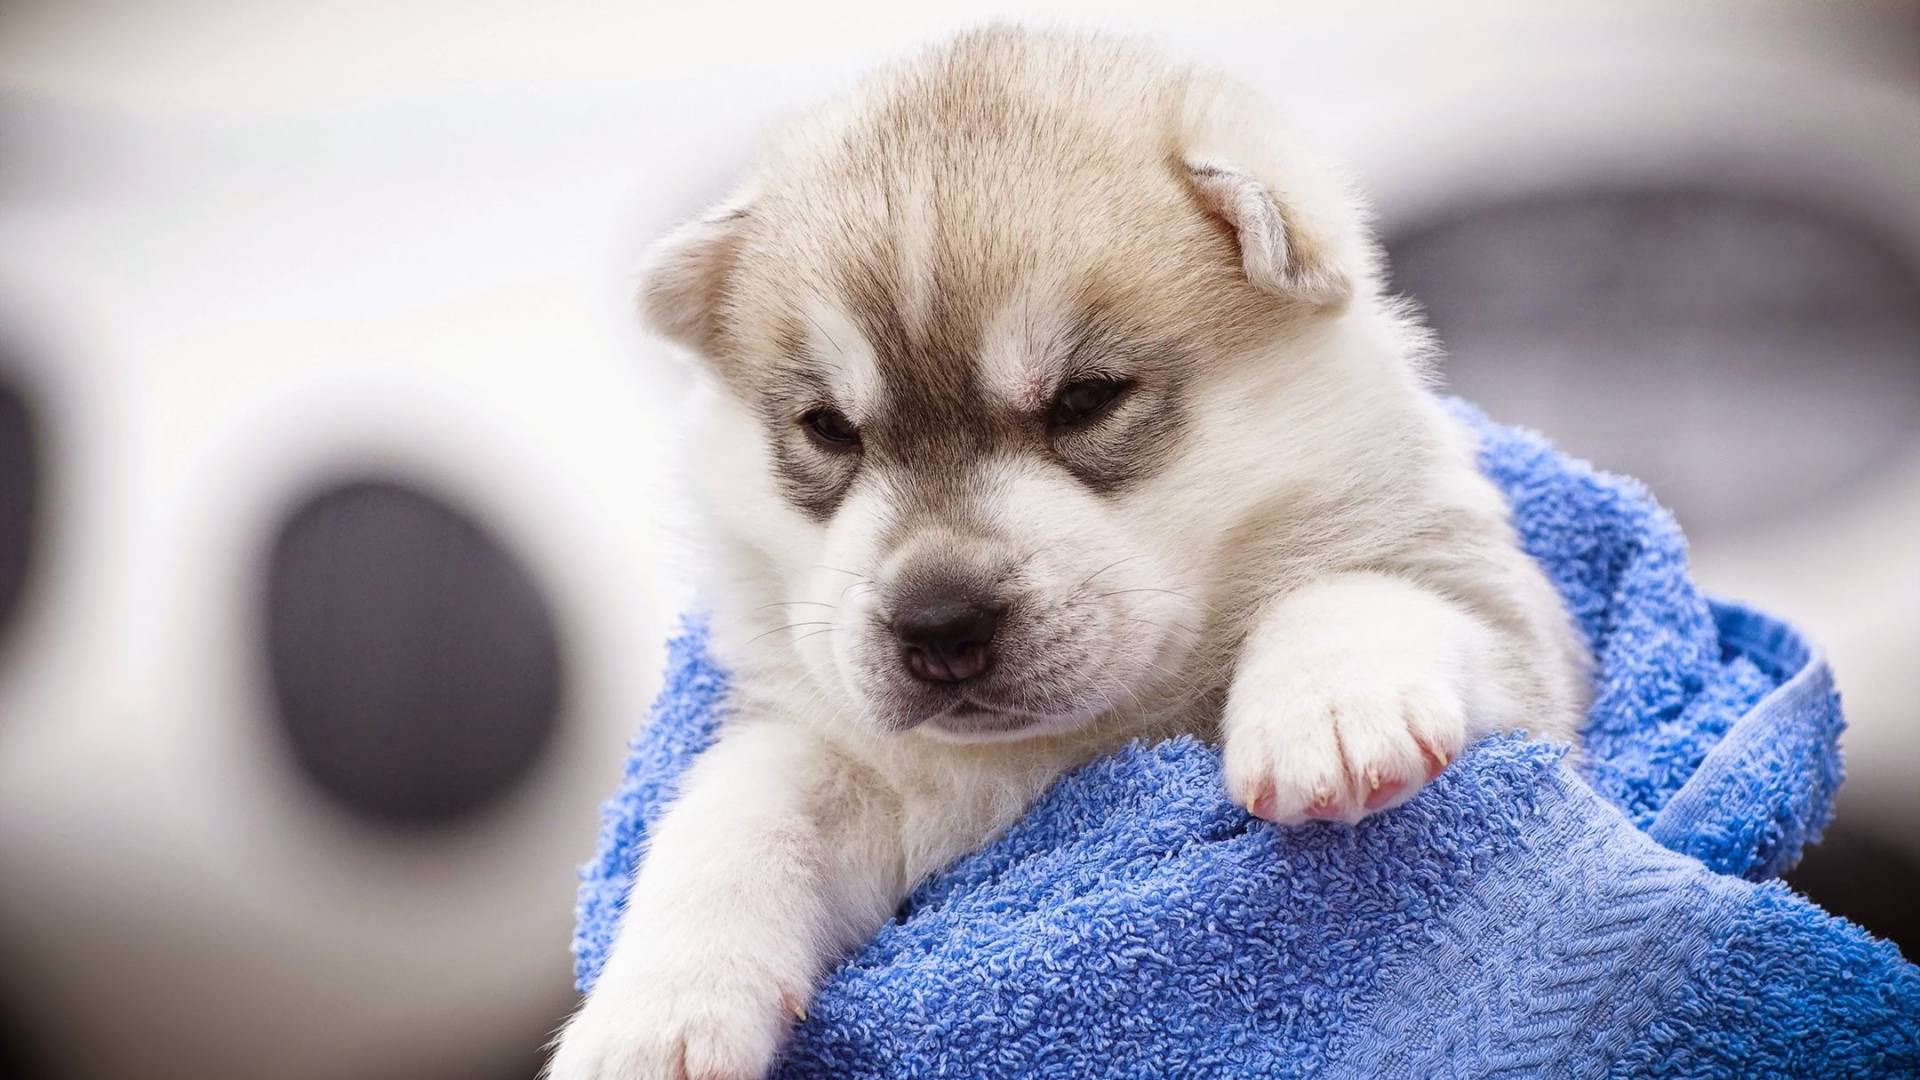 White and Brown Puppy on Blue Textile. Wallpaper in 1920x1080 Resolution